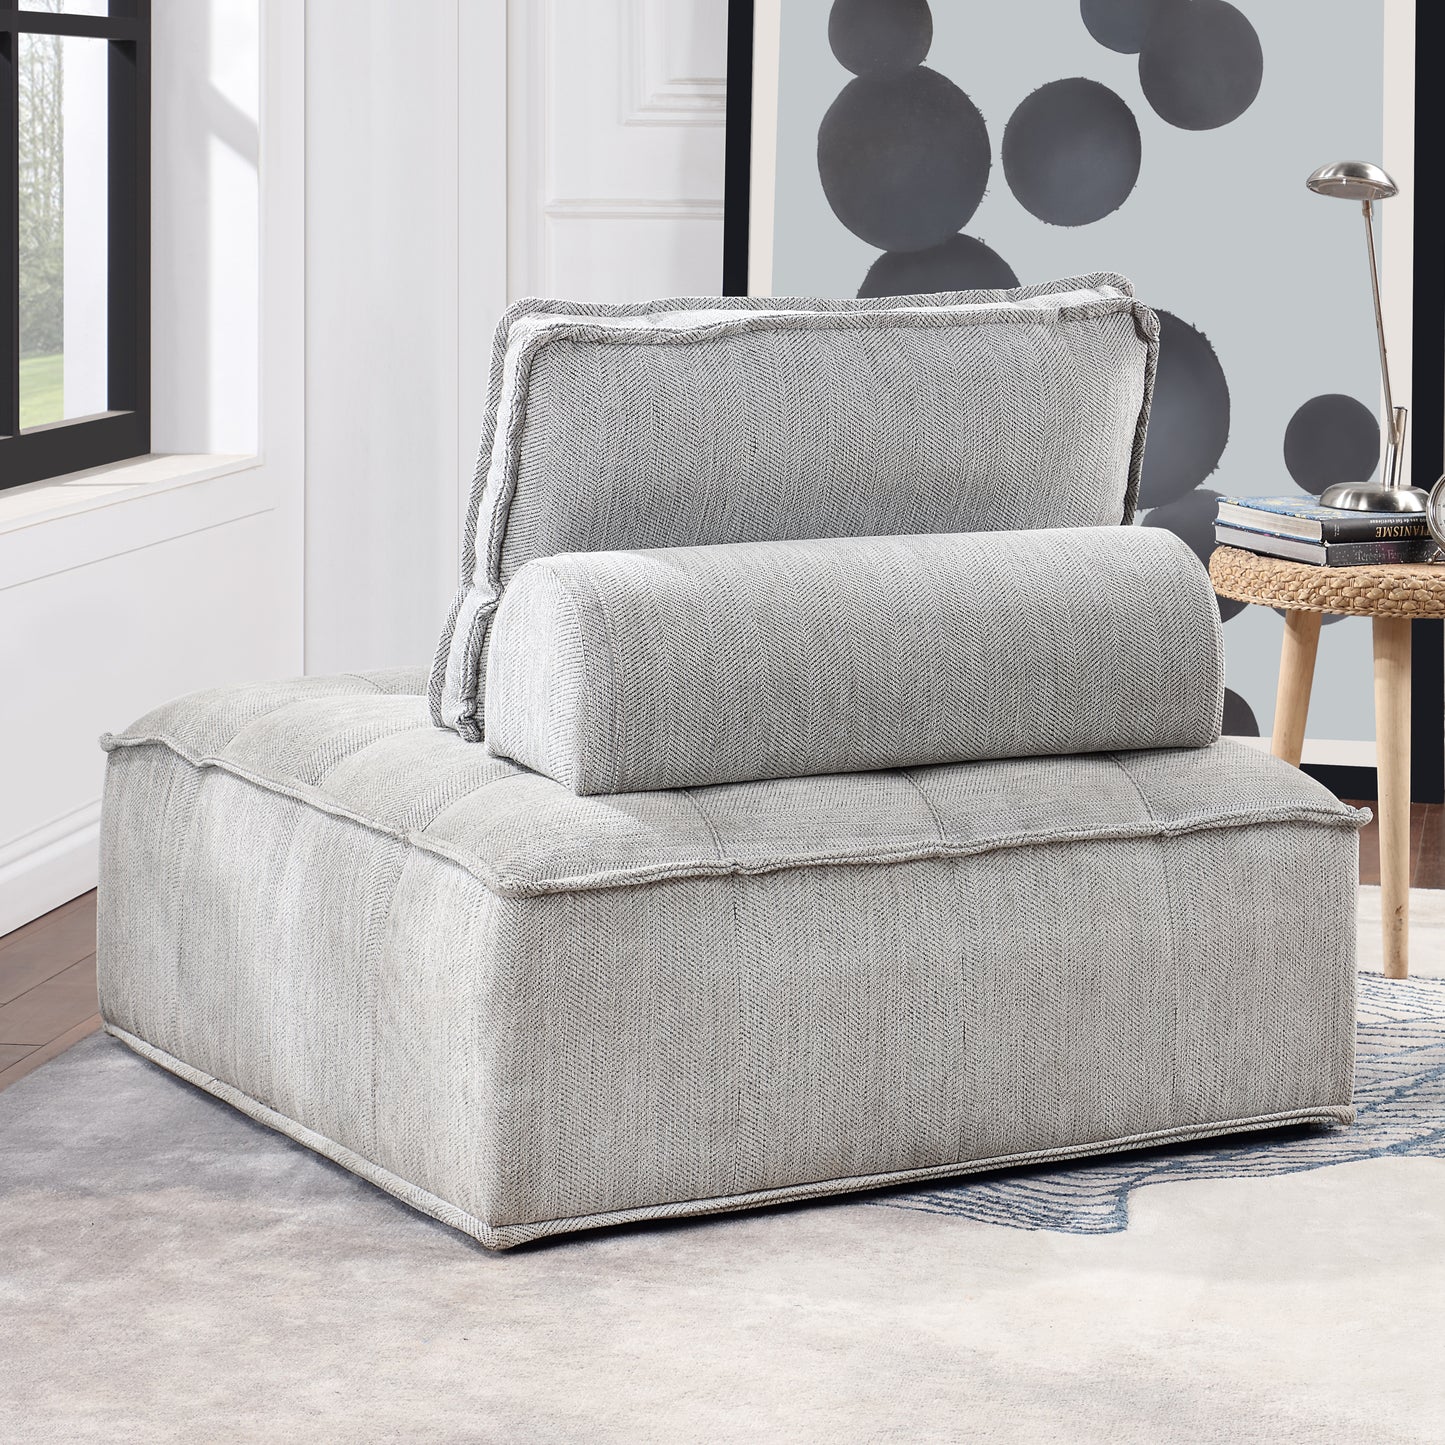 Upholstered Seating Armless Accent Chair 41.3*41.3*32.8 Inch Oversized Leisure Sofa Lounge Chair Lazy Sofa Barrel Chair for Living Room Corner Bedroom Office, Linen, Gray